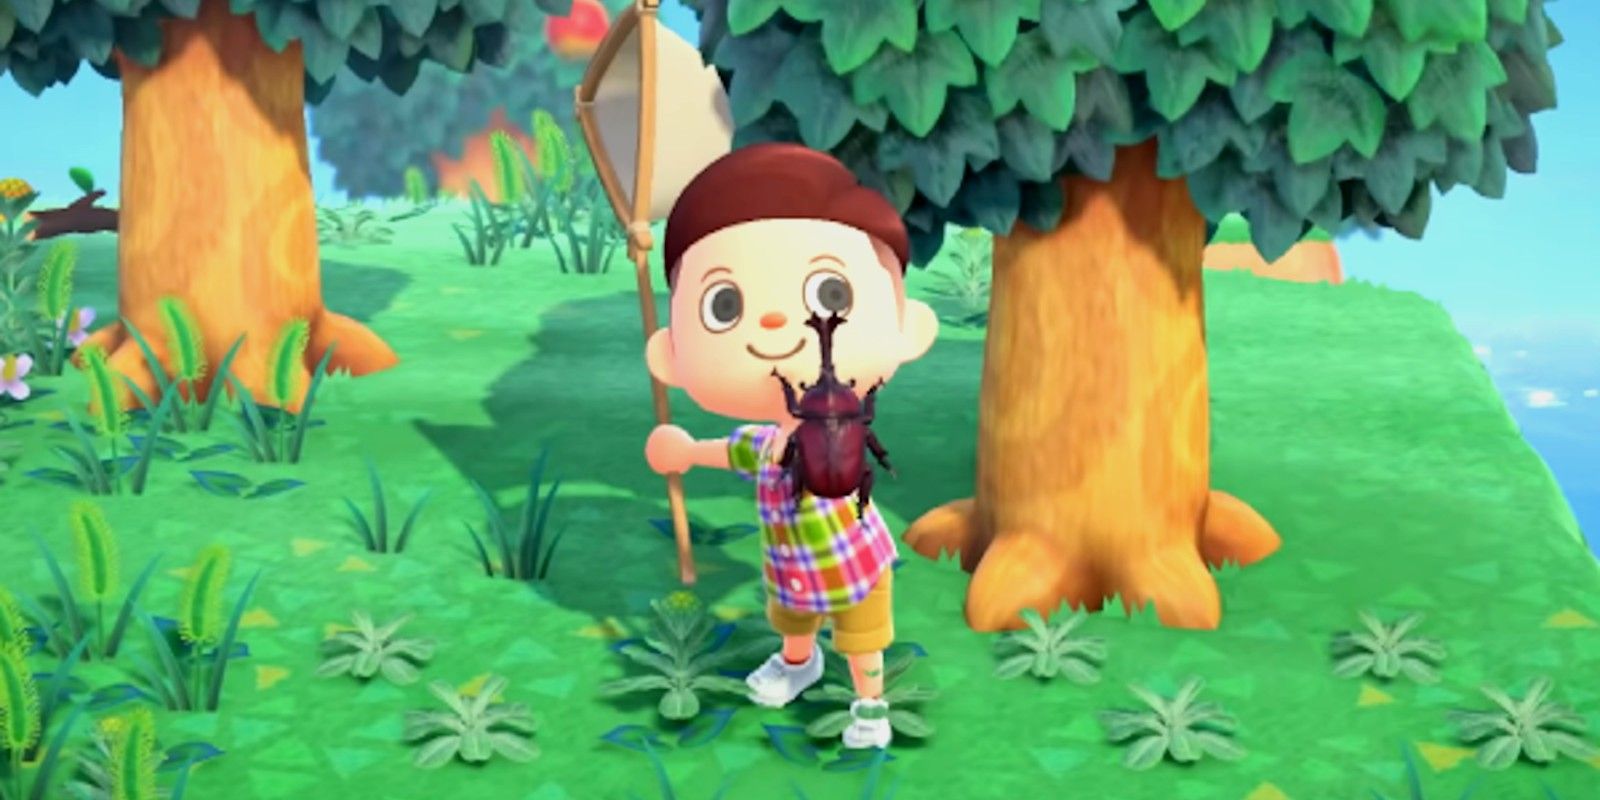 A player holds up a beetle he caught in Animal Crossing: New Horizons